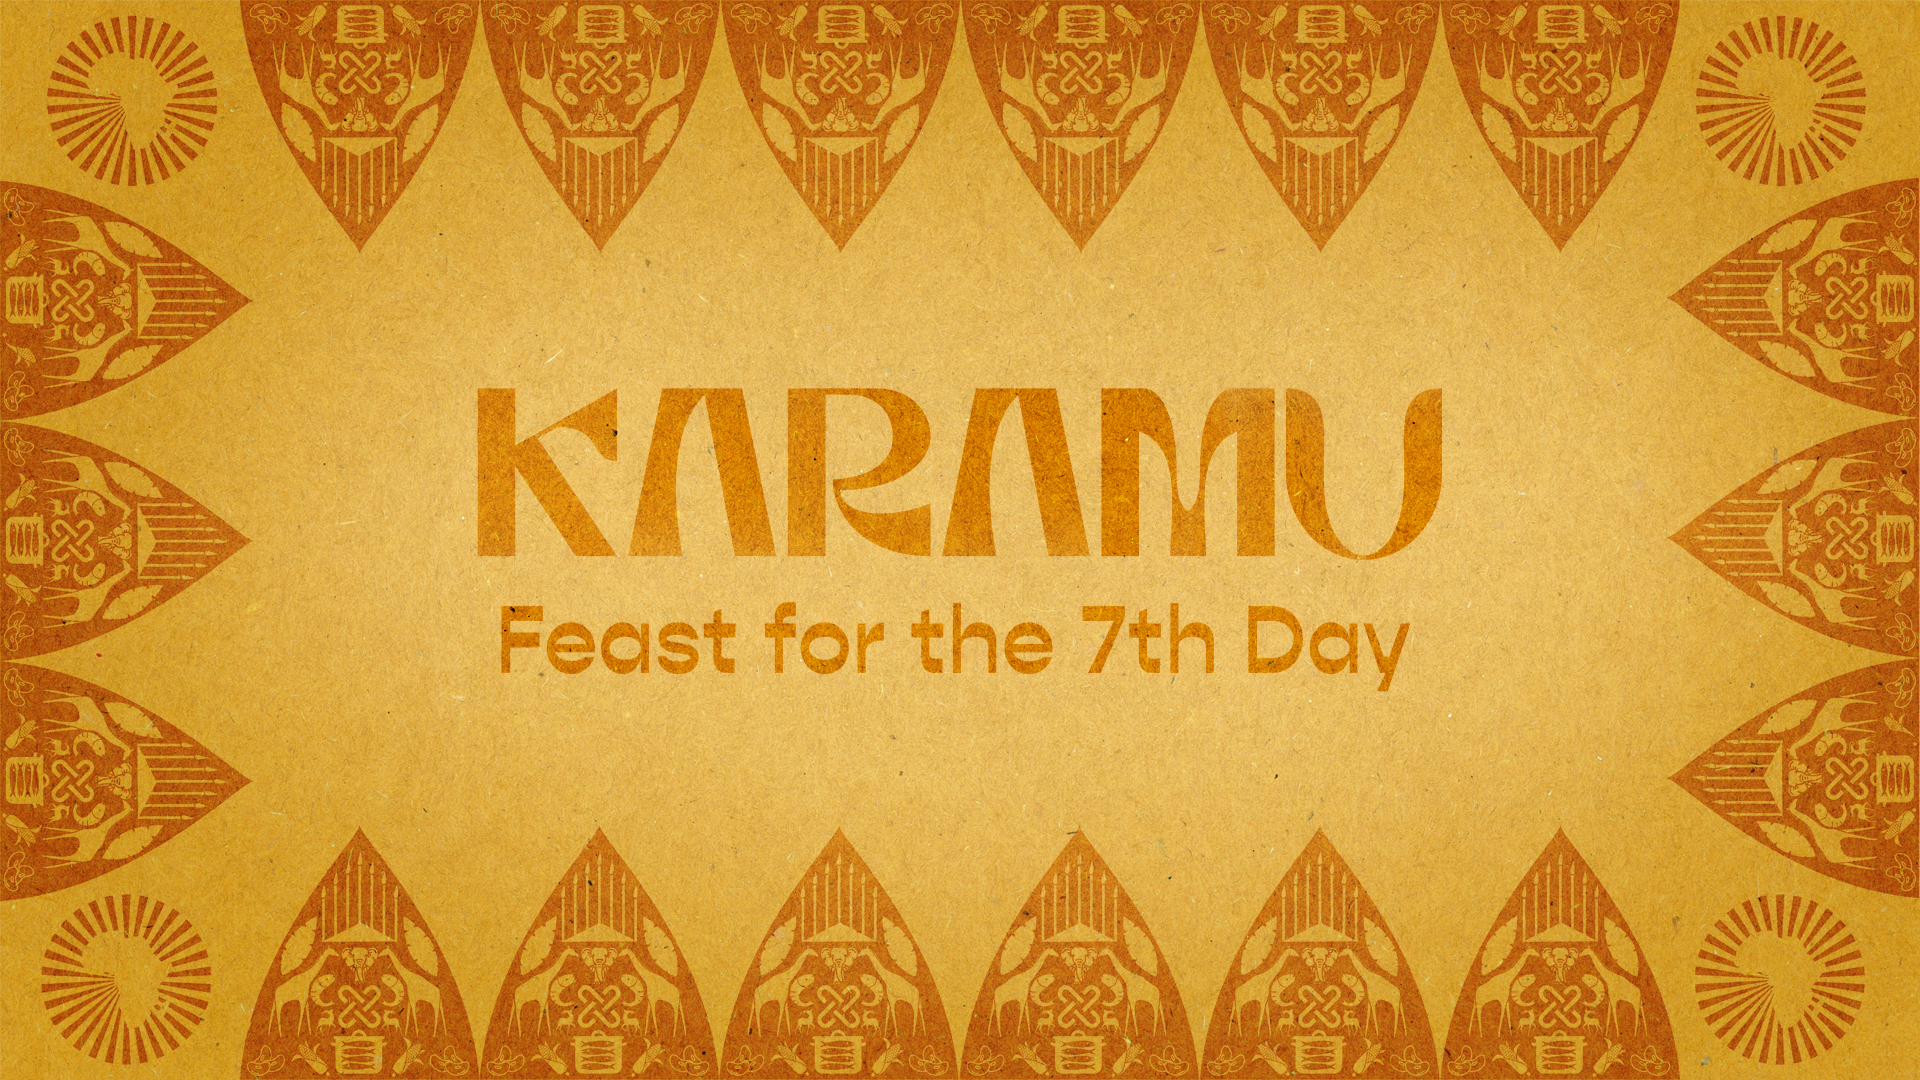 Check out Karamu: Feast for the 7th Day airing on a public television station near you!